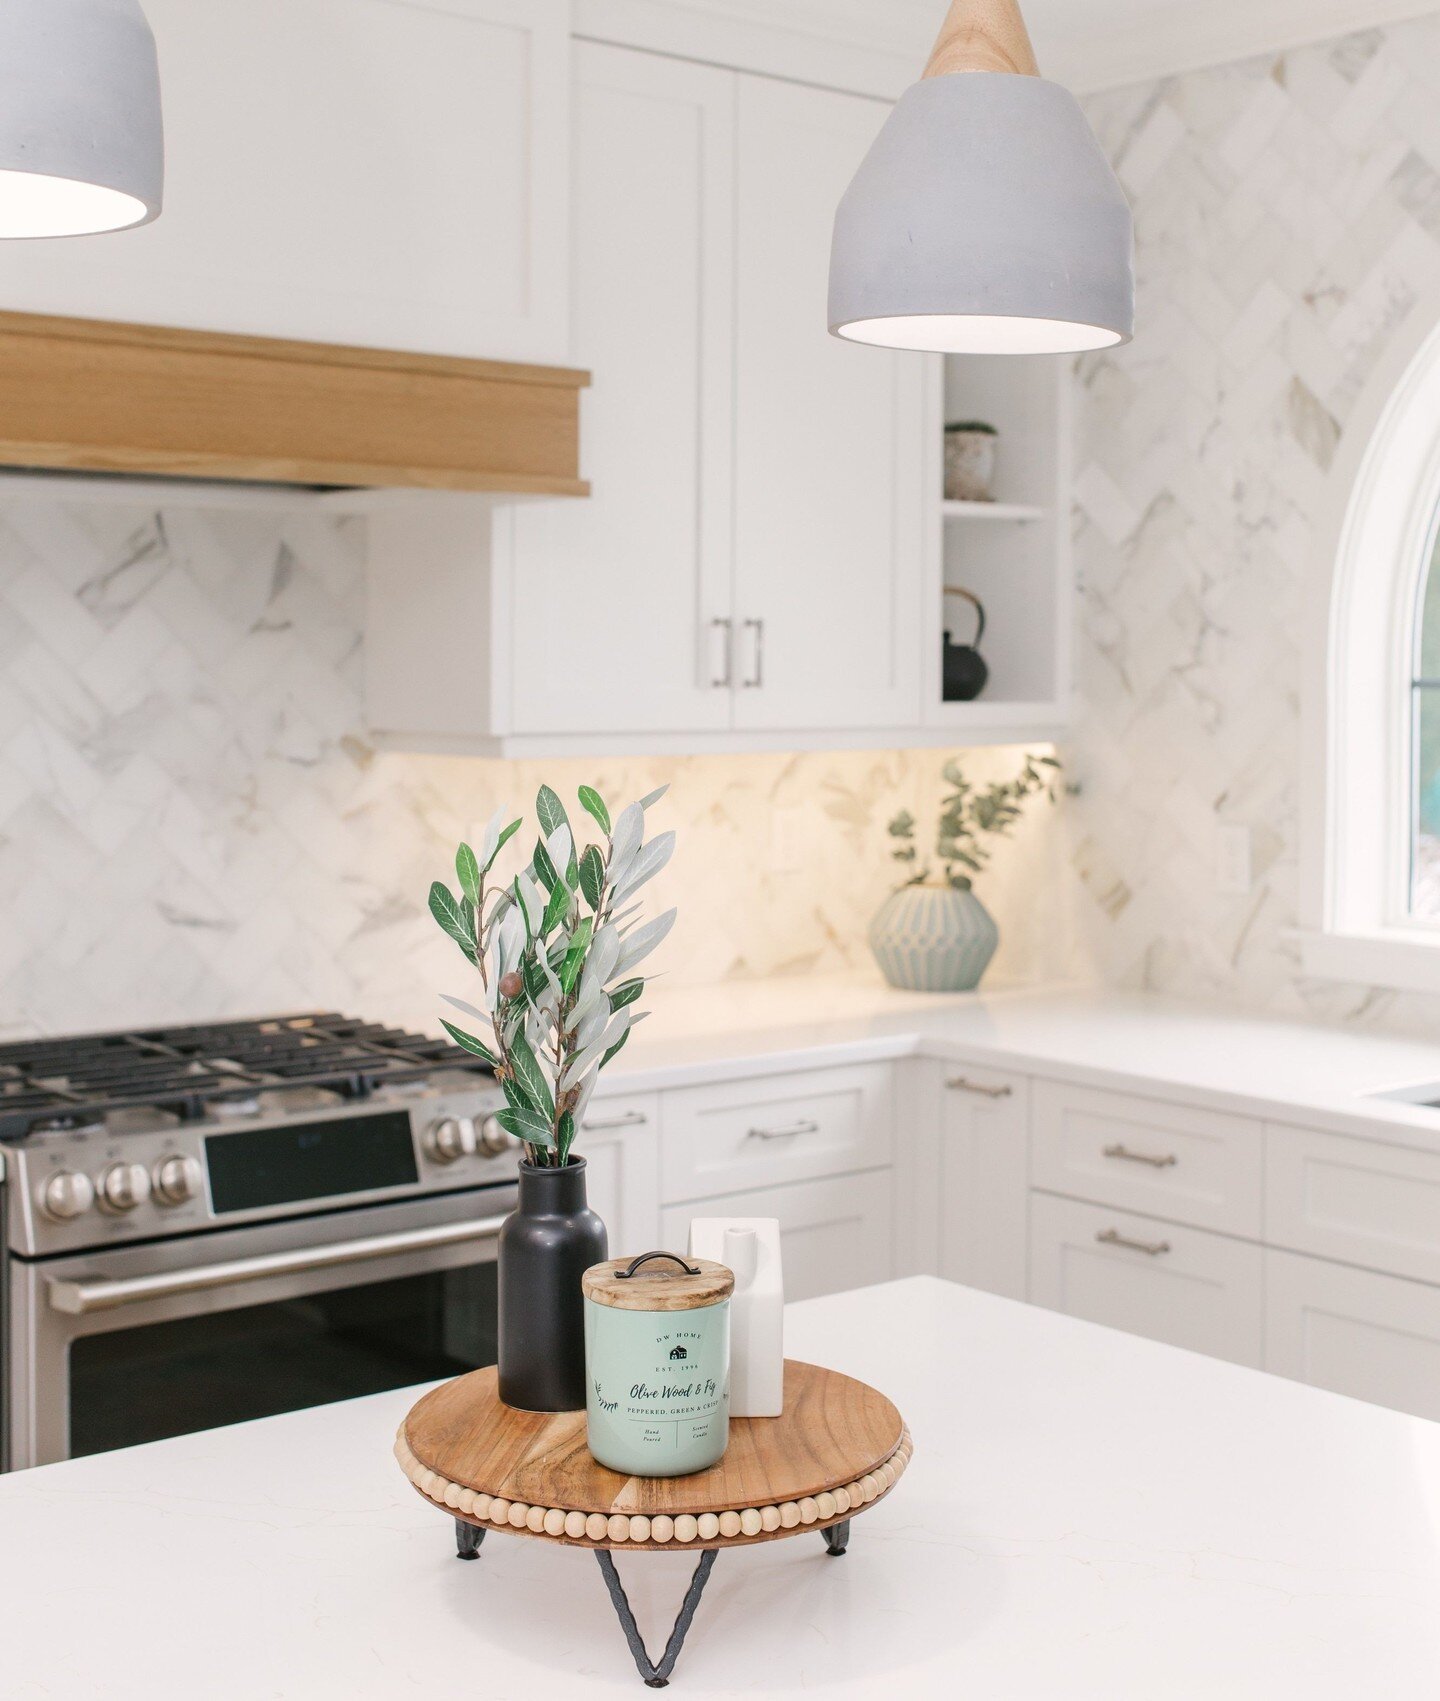 Step into kitchen serenity with this clean and modern space. From the sleek countertops to the organized shelves, every detail exudes elegance and functionality. ✨🍽️⁠
⁠
⁠
⁠
⁠
⁠
#interiordesign #designer #interiordesigner #ctbusiness #womenownedbusin